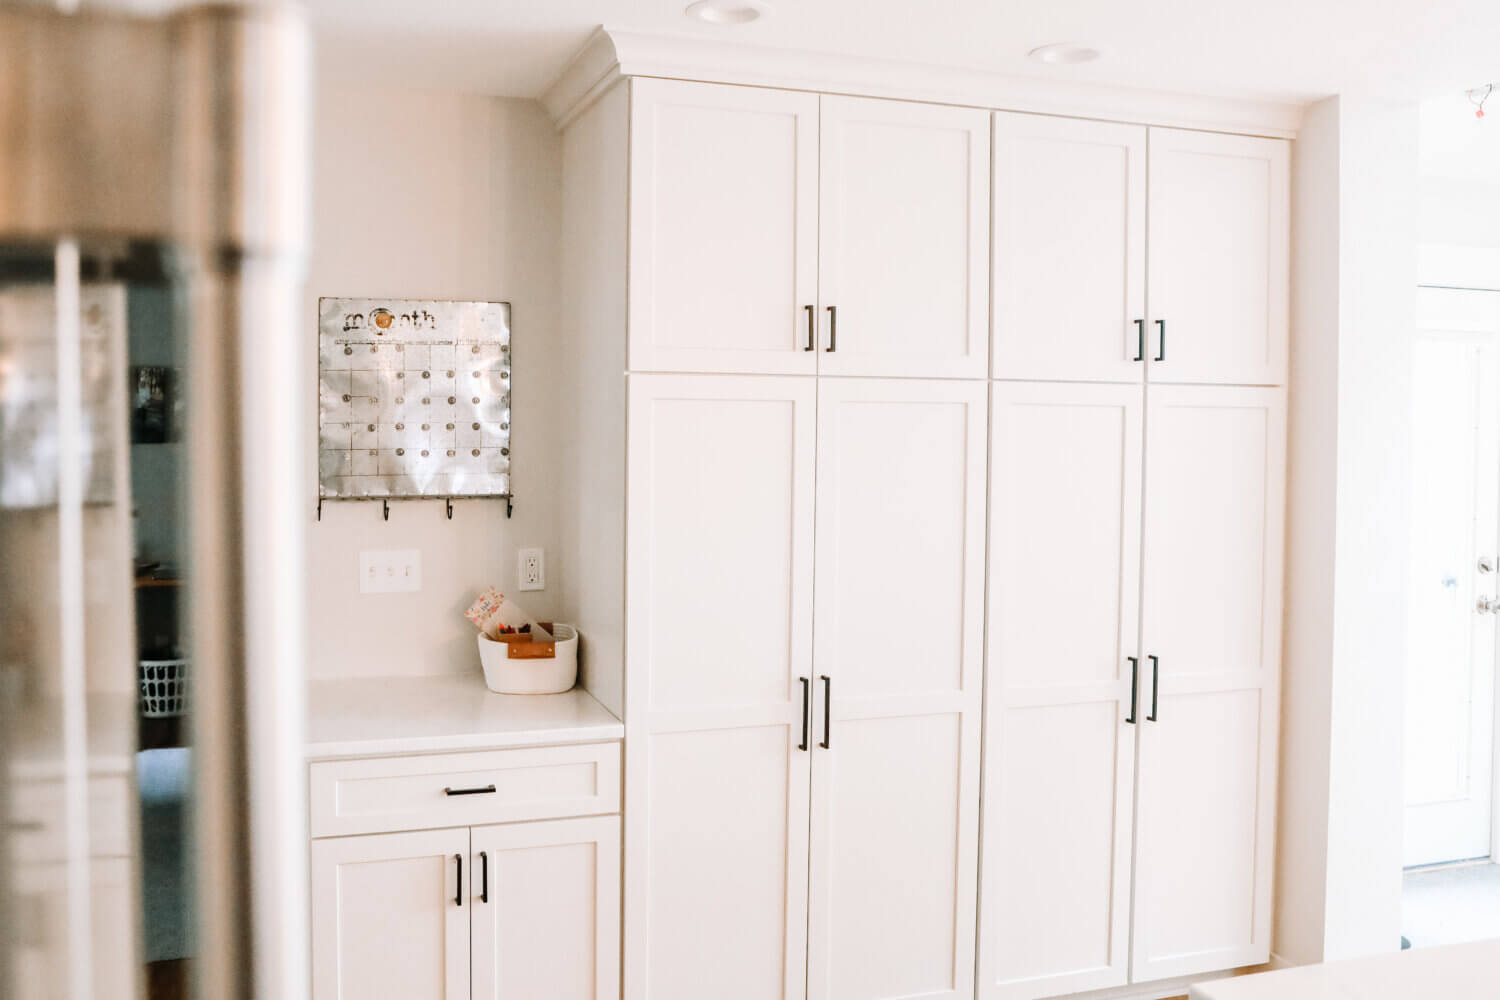 A wall of white painted cabinets and an drop-zone with an organizational planner.